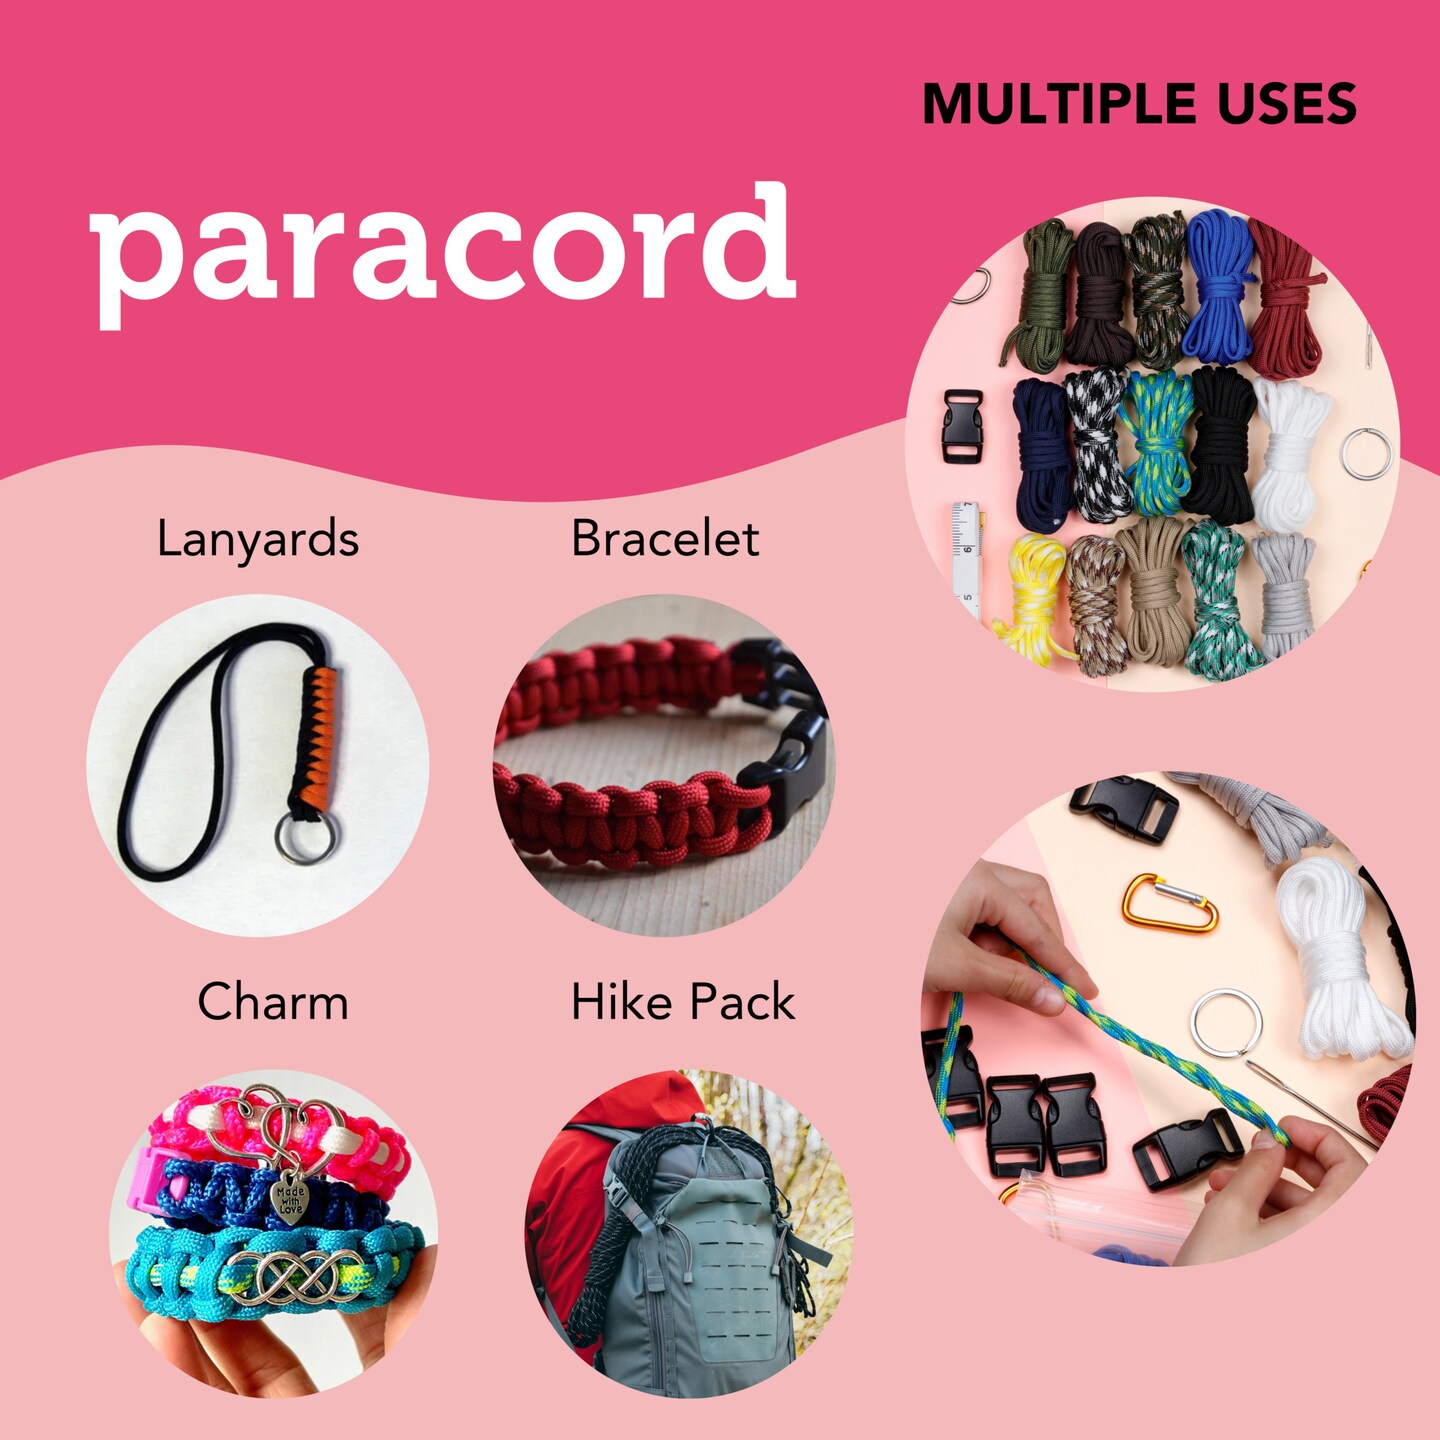 Incraftables Paracord kit with 15 Colors Paracord Rope (2mm